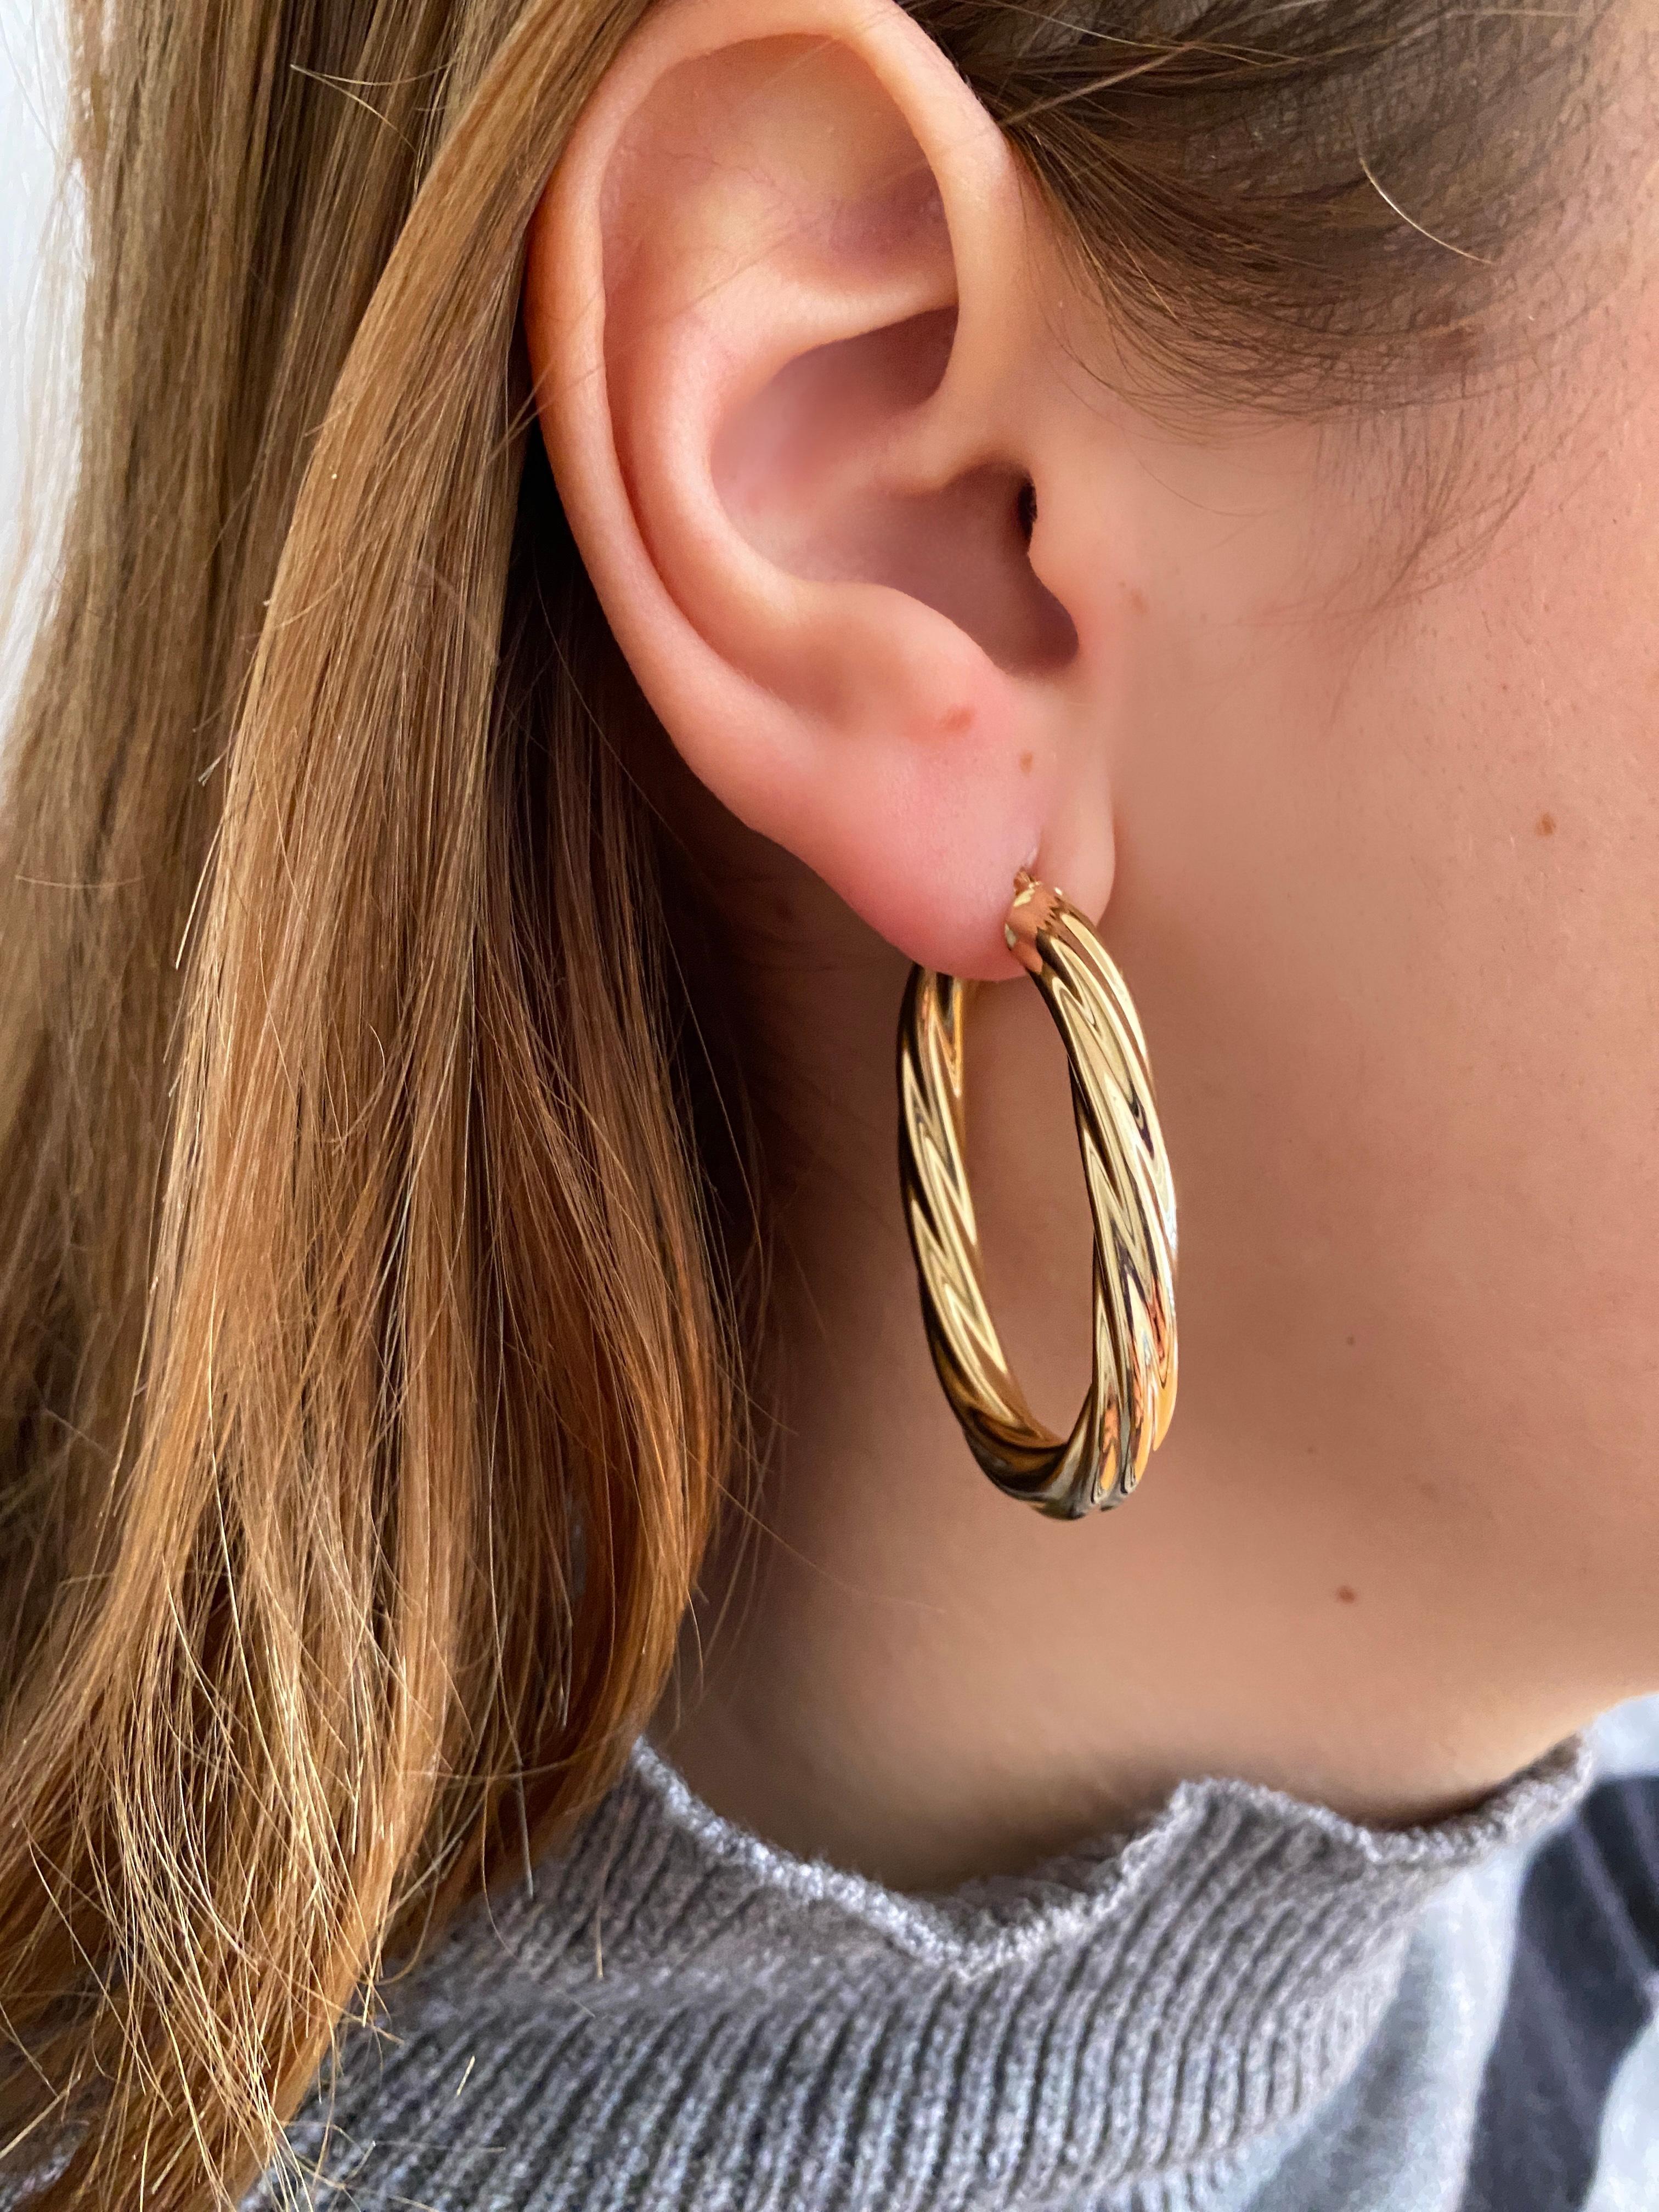 Revival Earrings from the 90th Century, a timeless treasure crafted in 18K yellow gold. 
These oval hoop earrings boast impeccable condition, showcasing no marks or dents, ensuring lasting beauty and durability.

The oval shape of these earrings